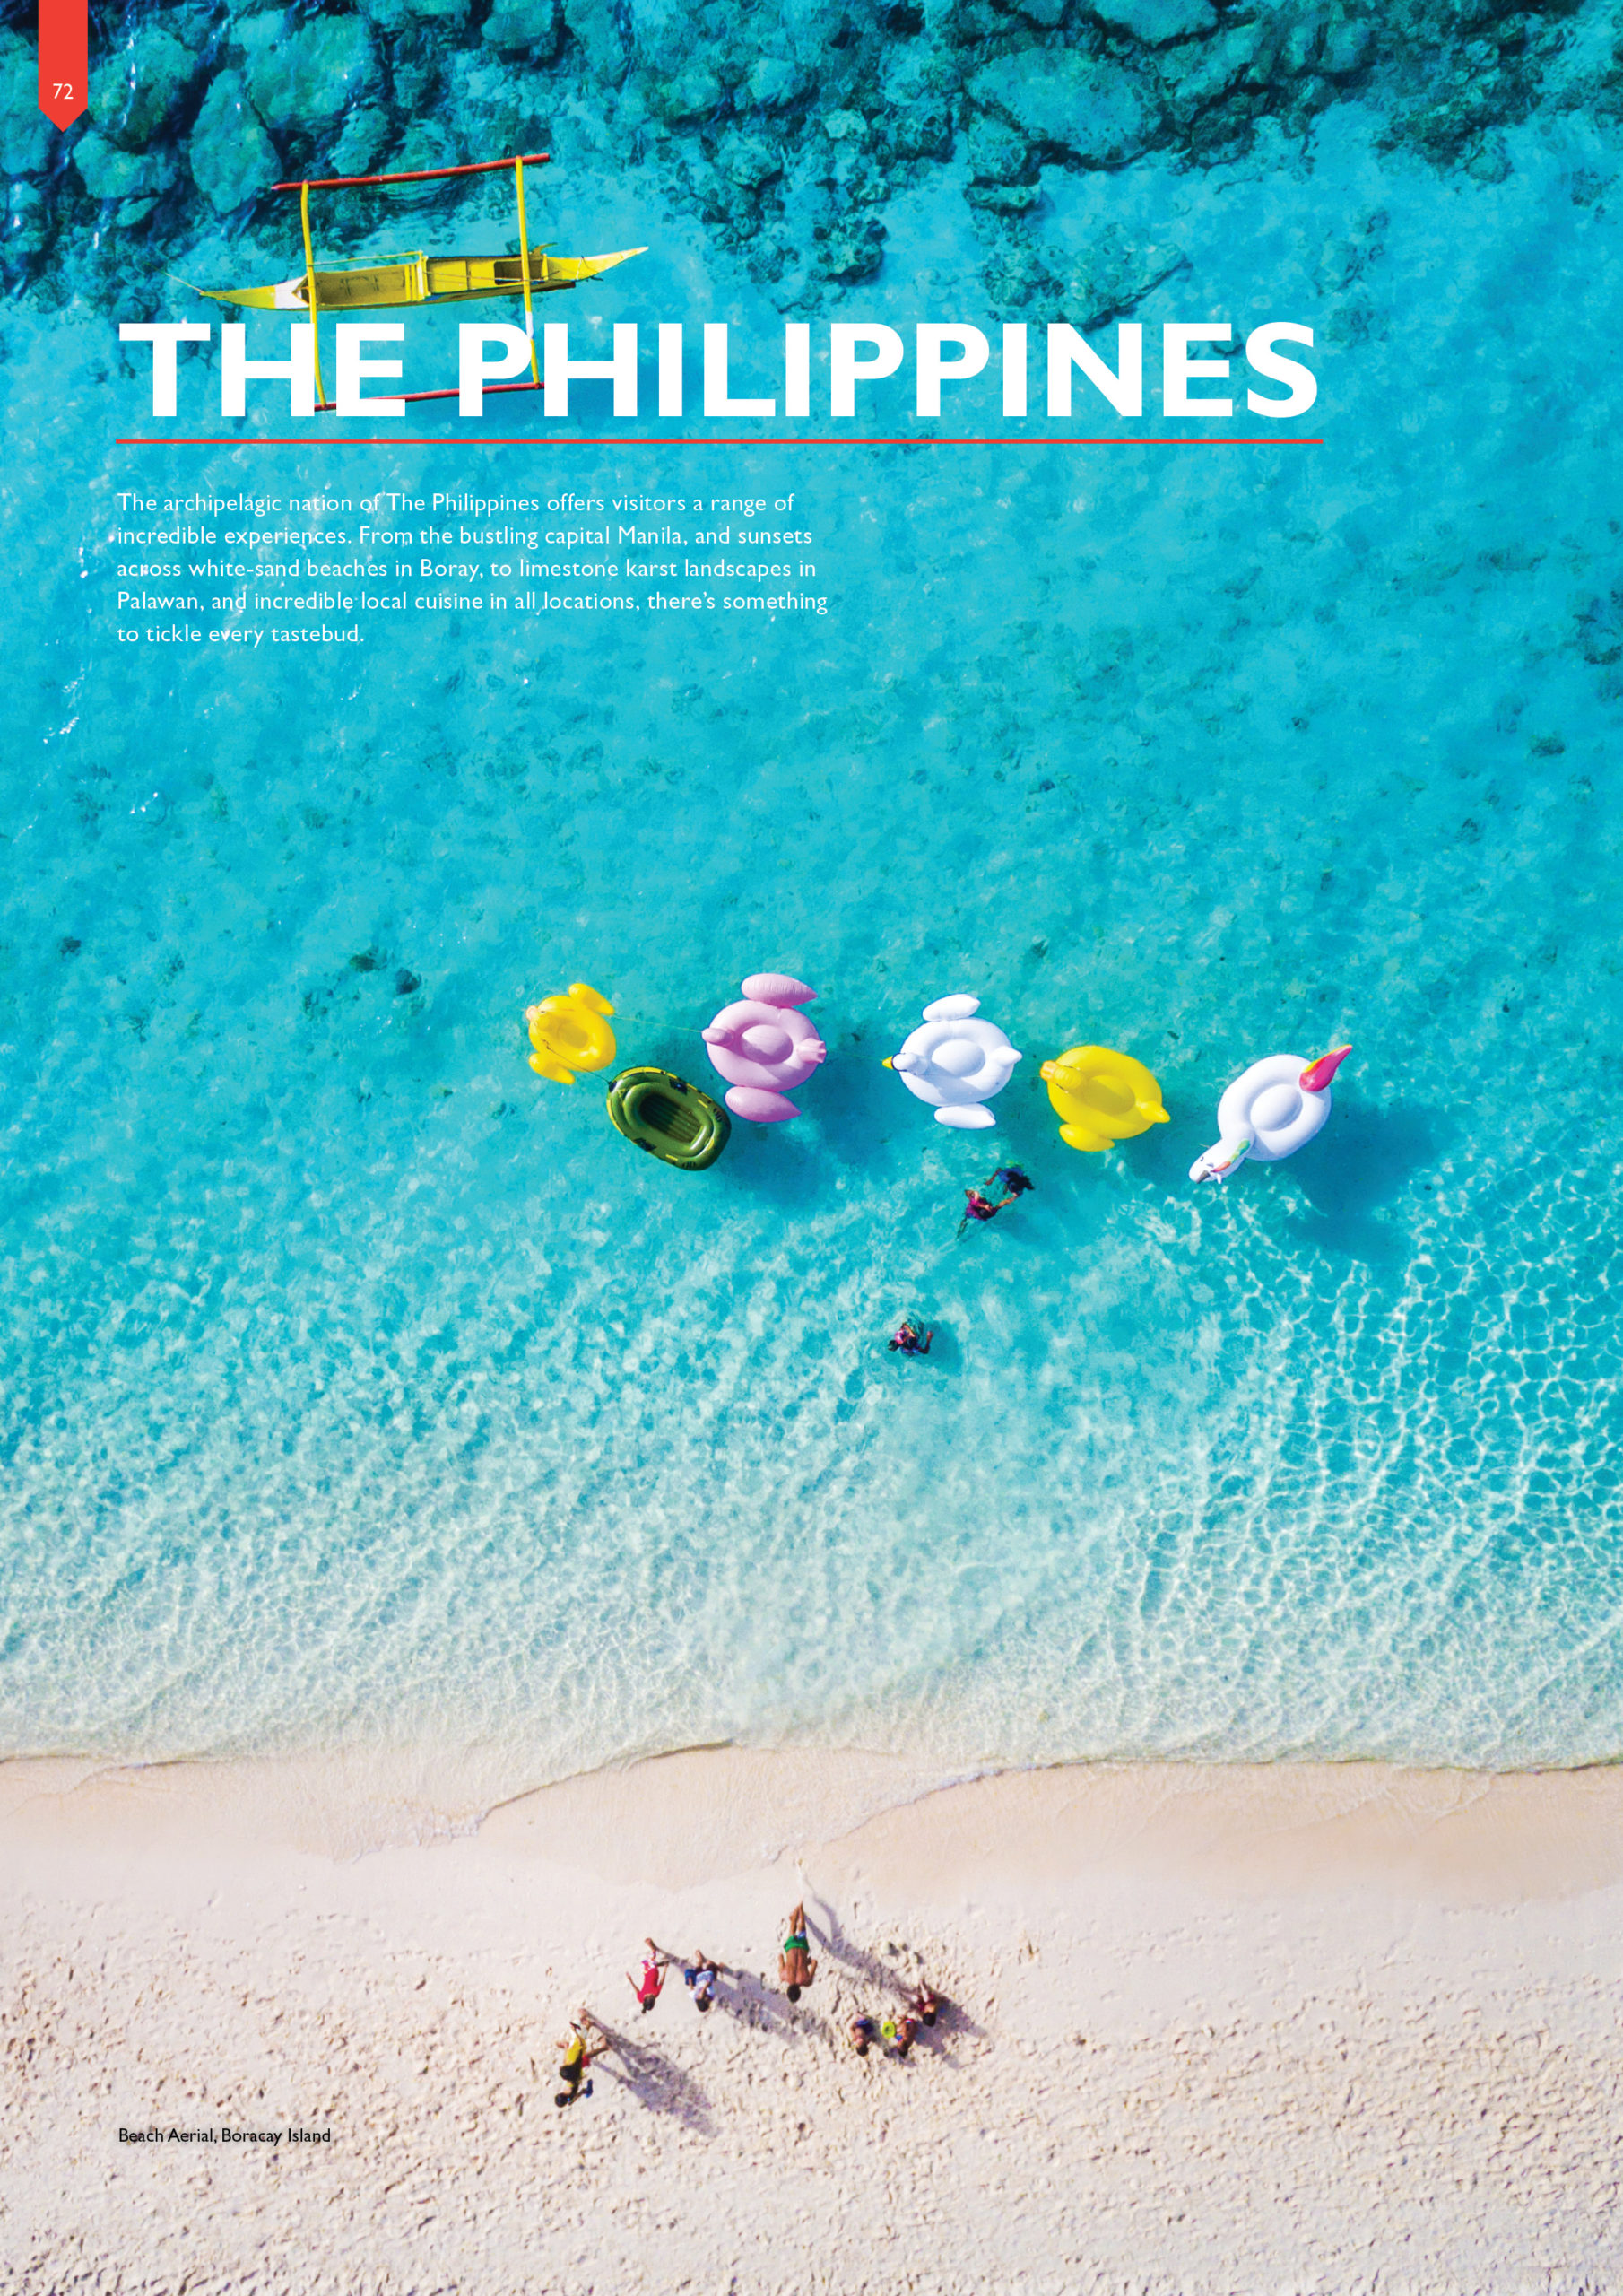 Flight Centre Singapore, Hong Kong, Malaysia & The Philippines Brochure 2020/21